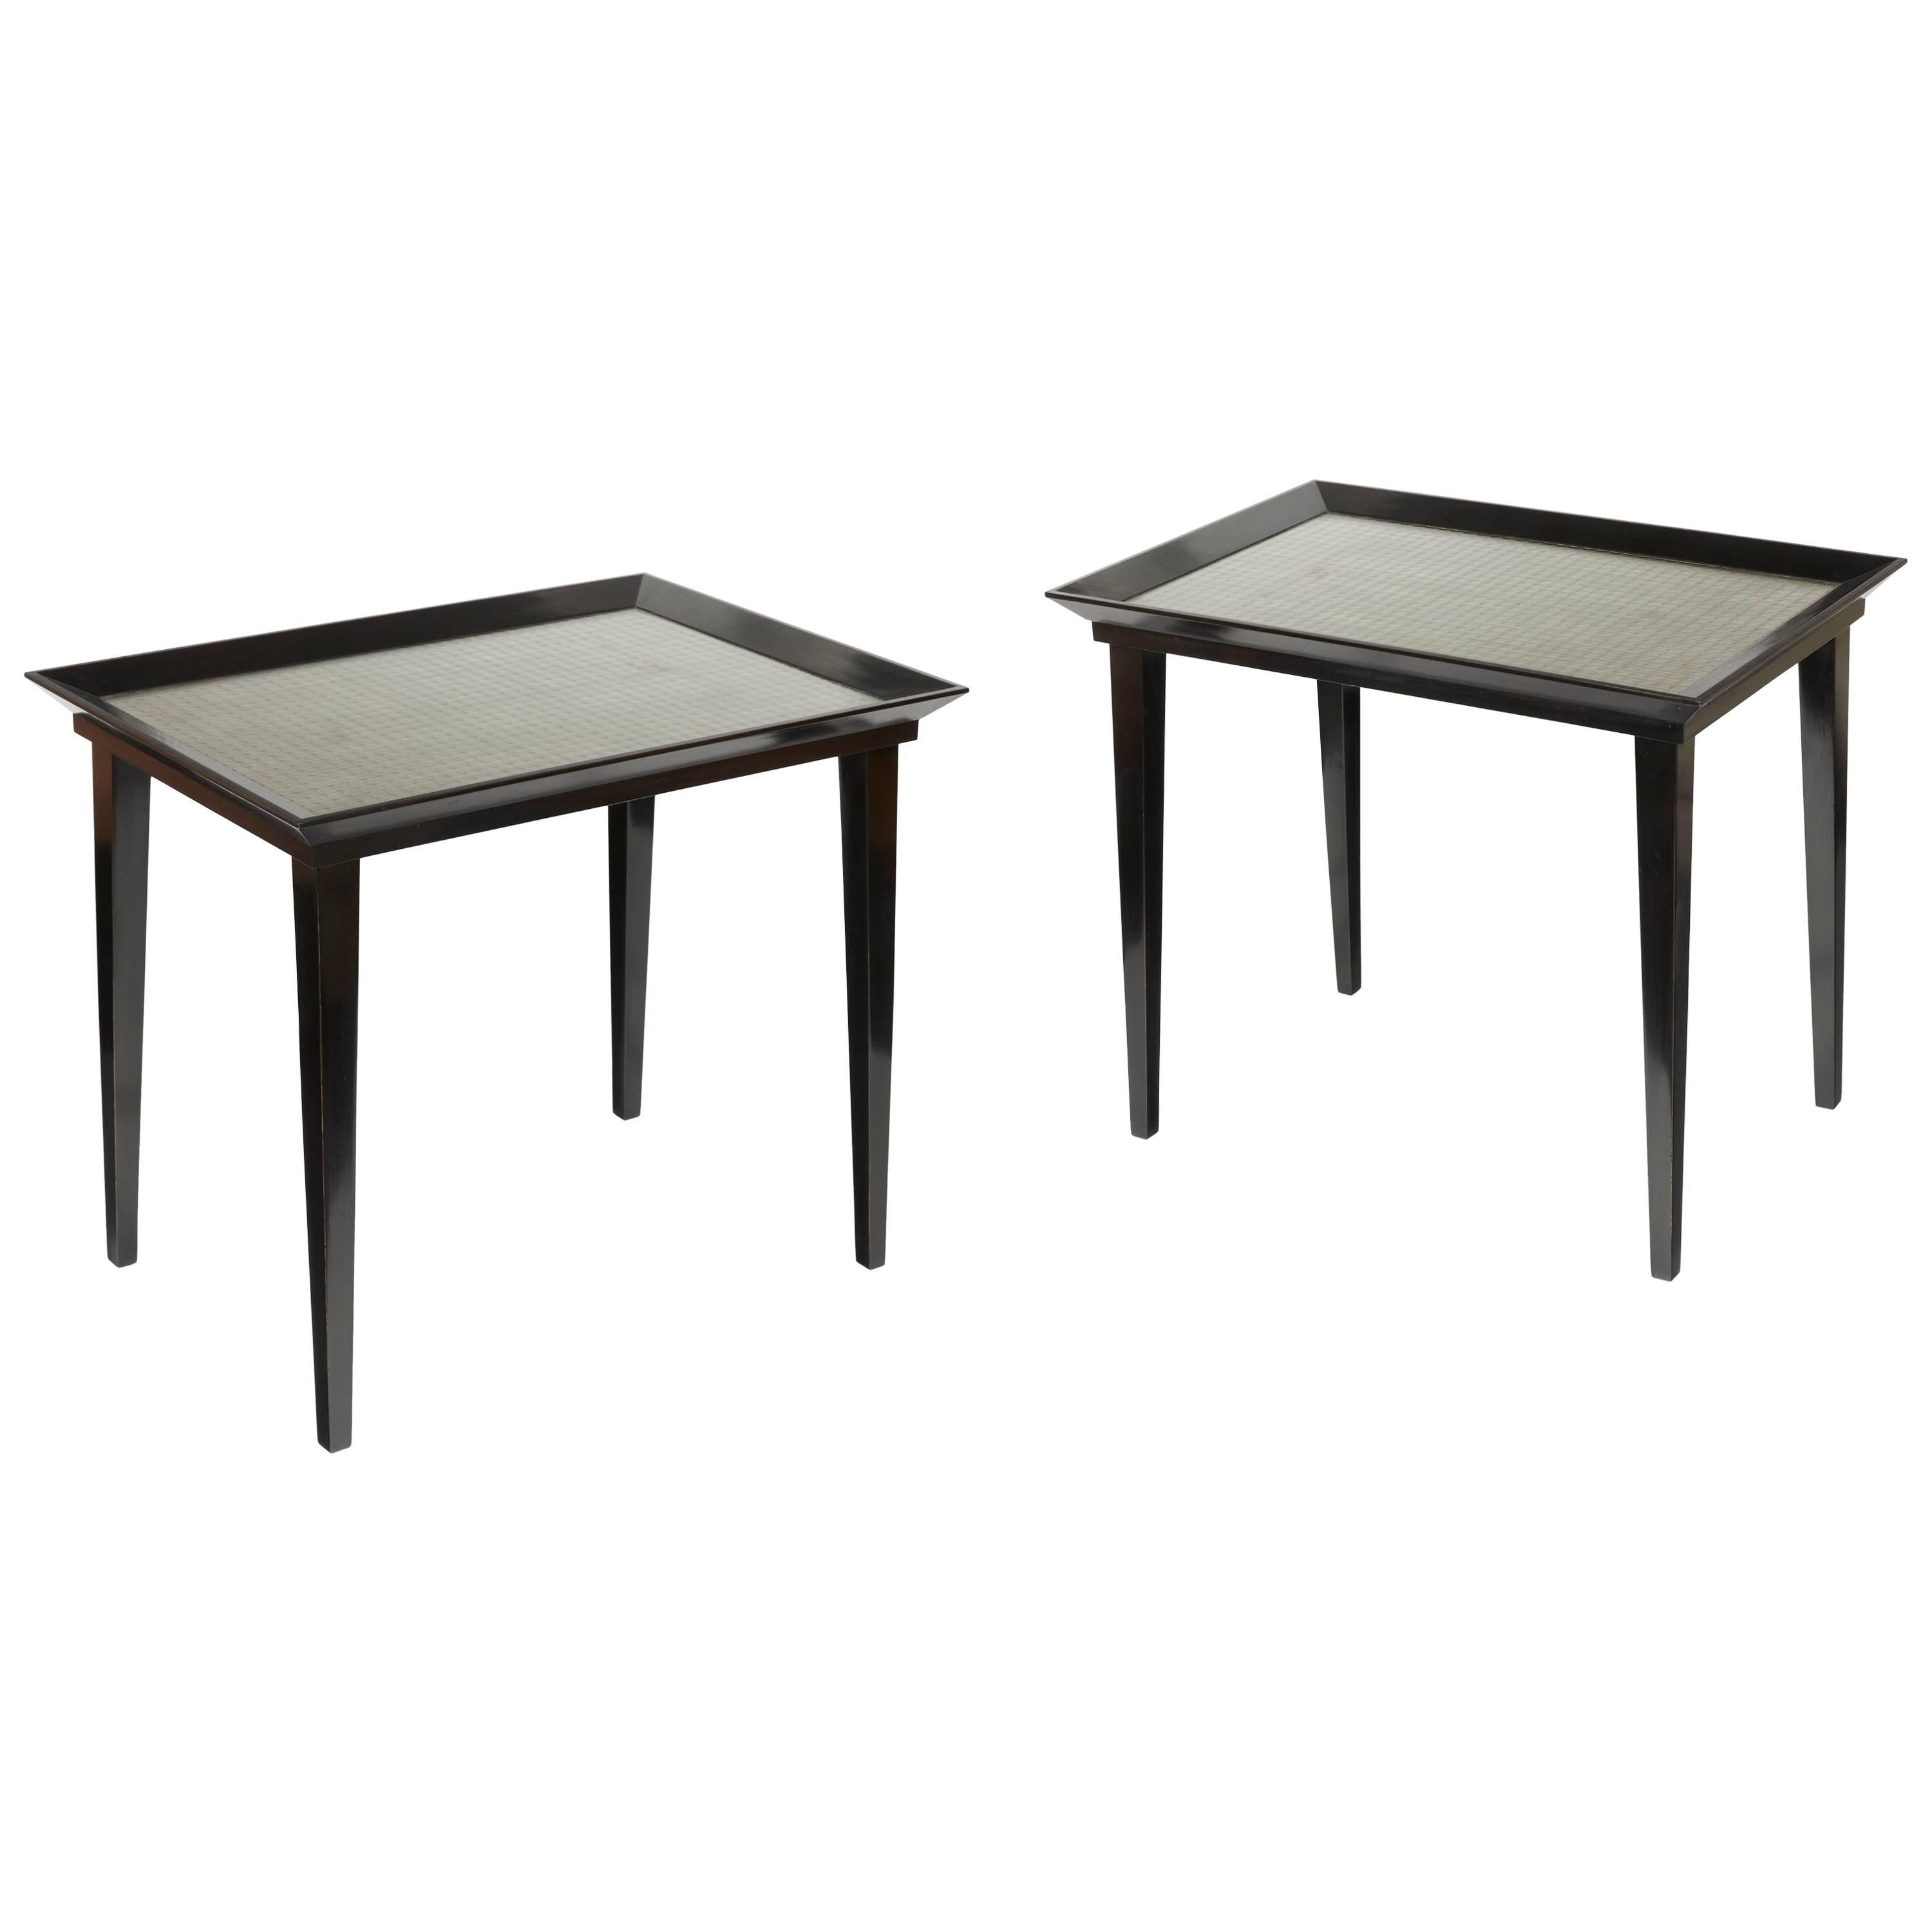 Pair of Blackened Wood and Glass Tables